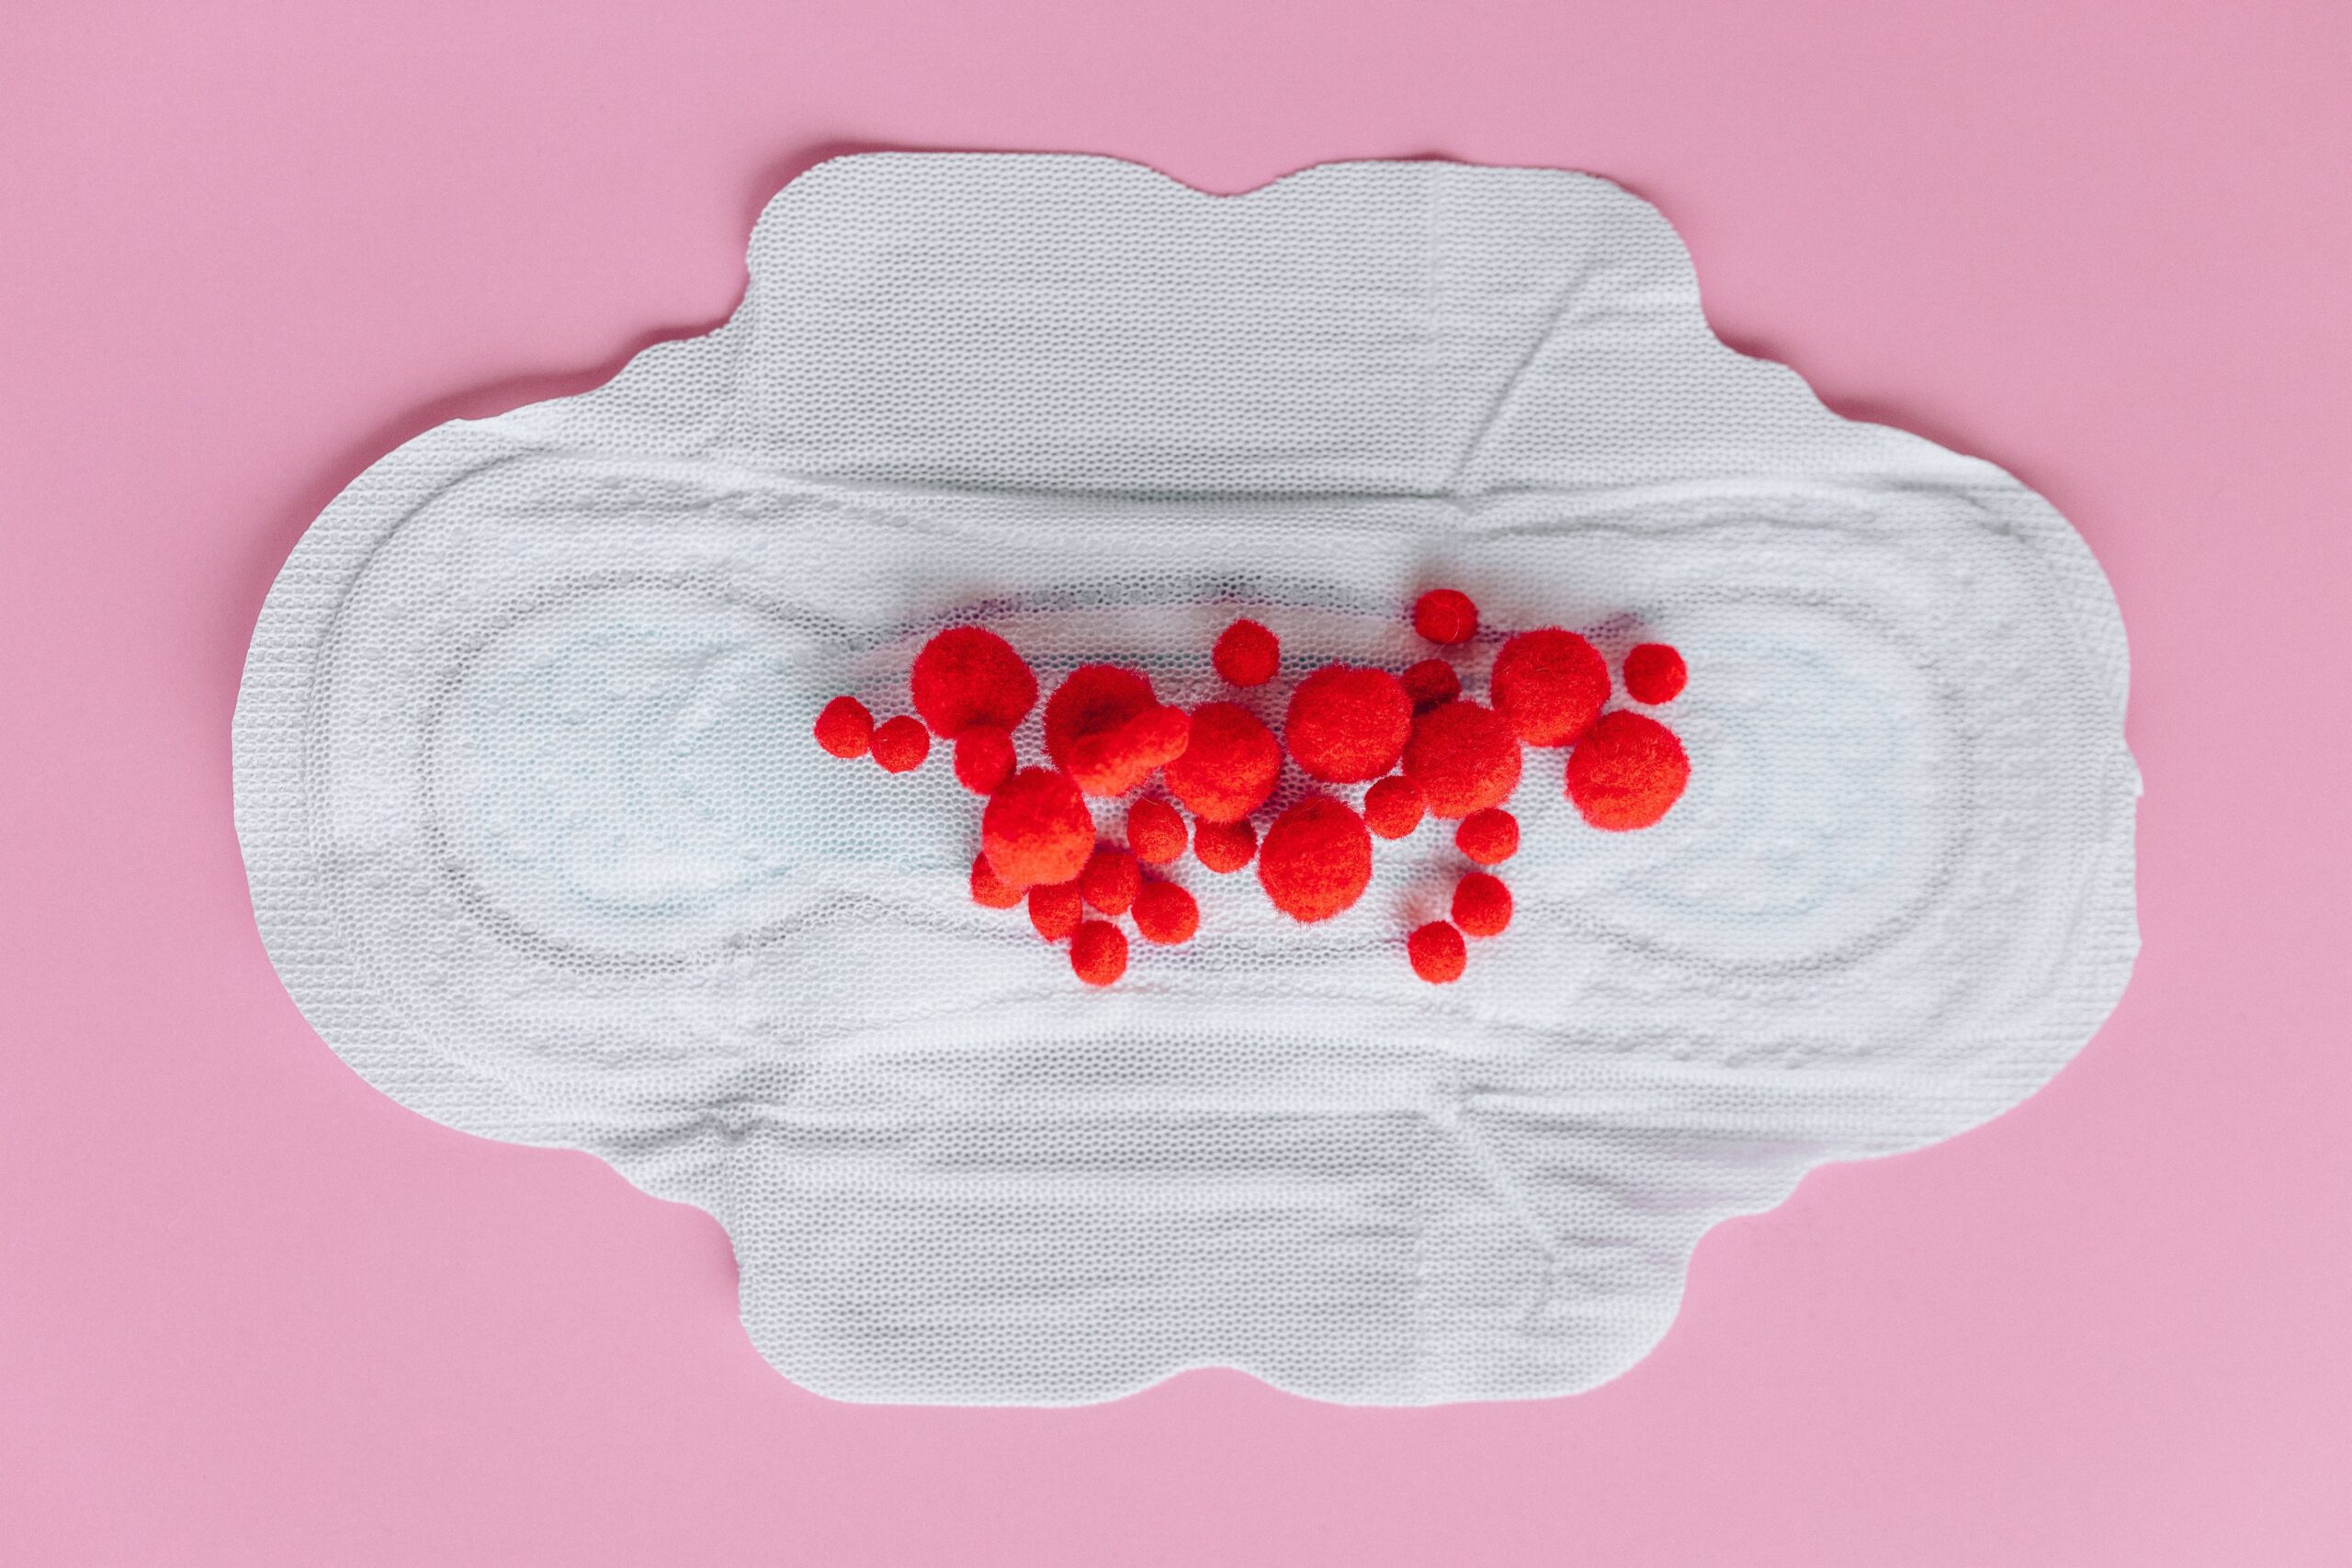 Woman Who 'Free Bleeds' Says It Makes Her Periods 'Orgasmic' - Mouths of  Mums